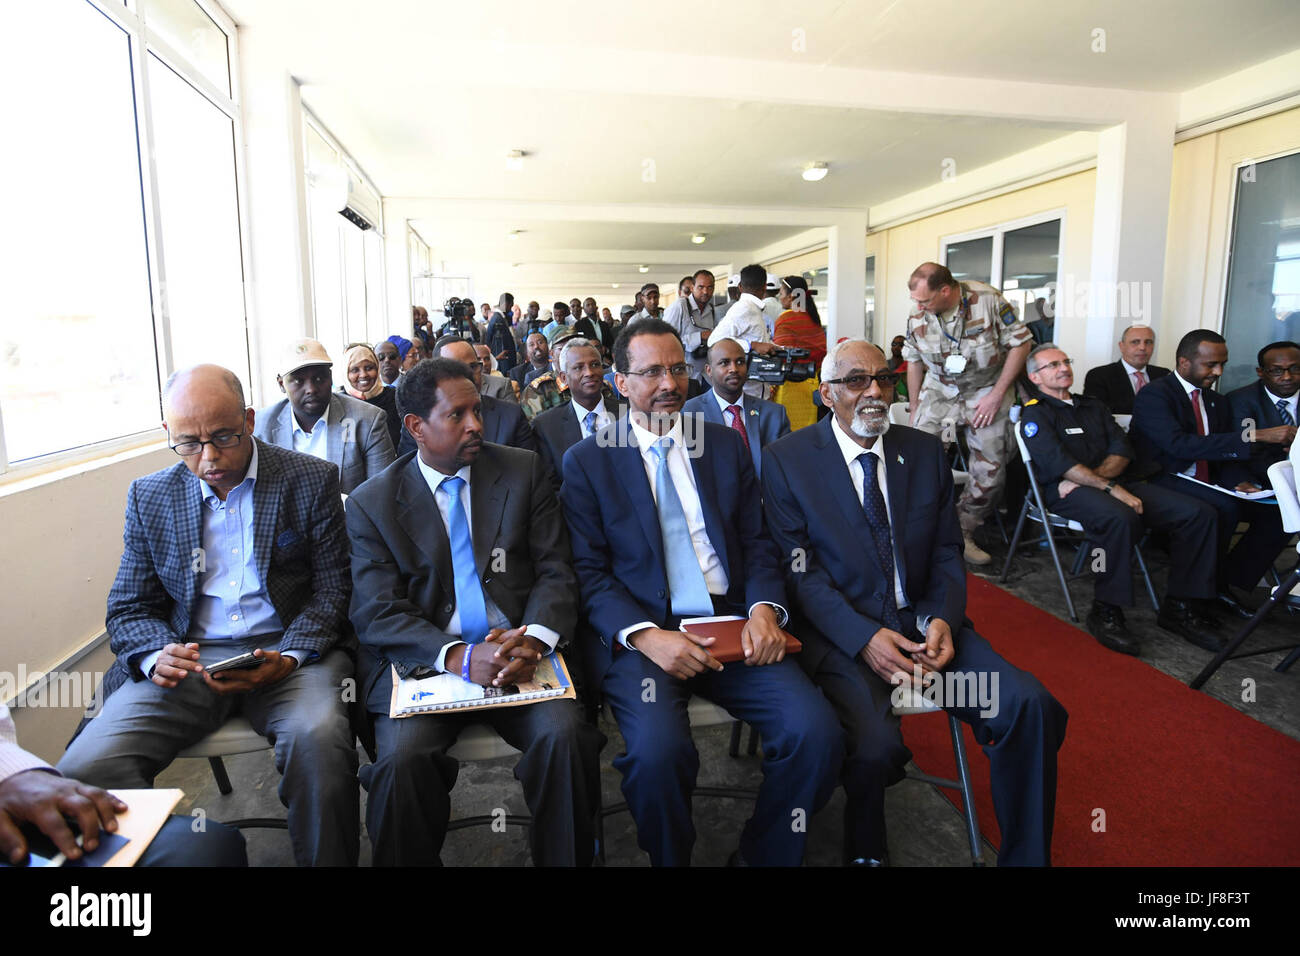 Officials from Somali Federal Government, European Union, diplomats and guests attend a ceremony to mark Europe Day in Mogadishu on May 09, 2017. AMISOM Photo / Omar Abdisalan Stock Photo